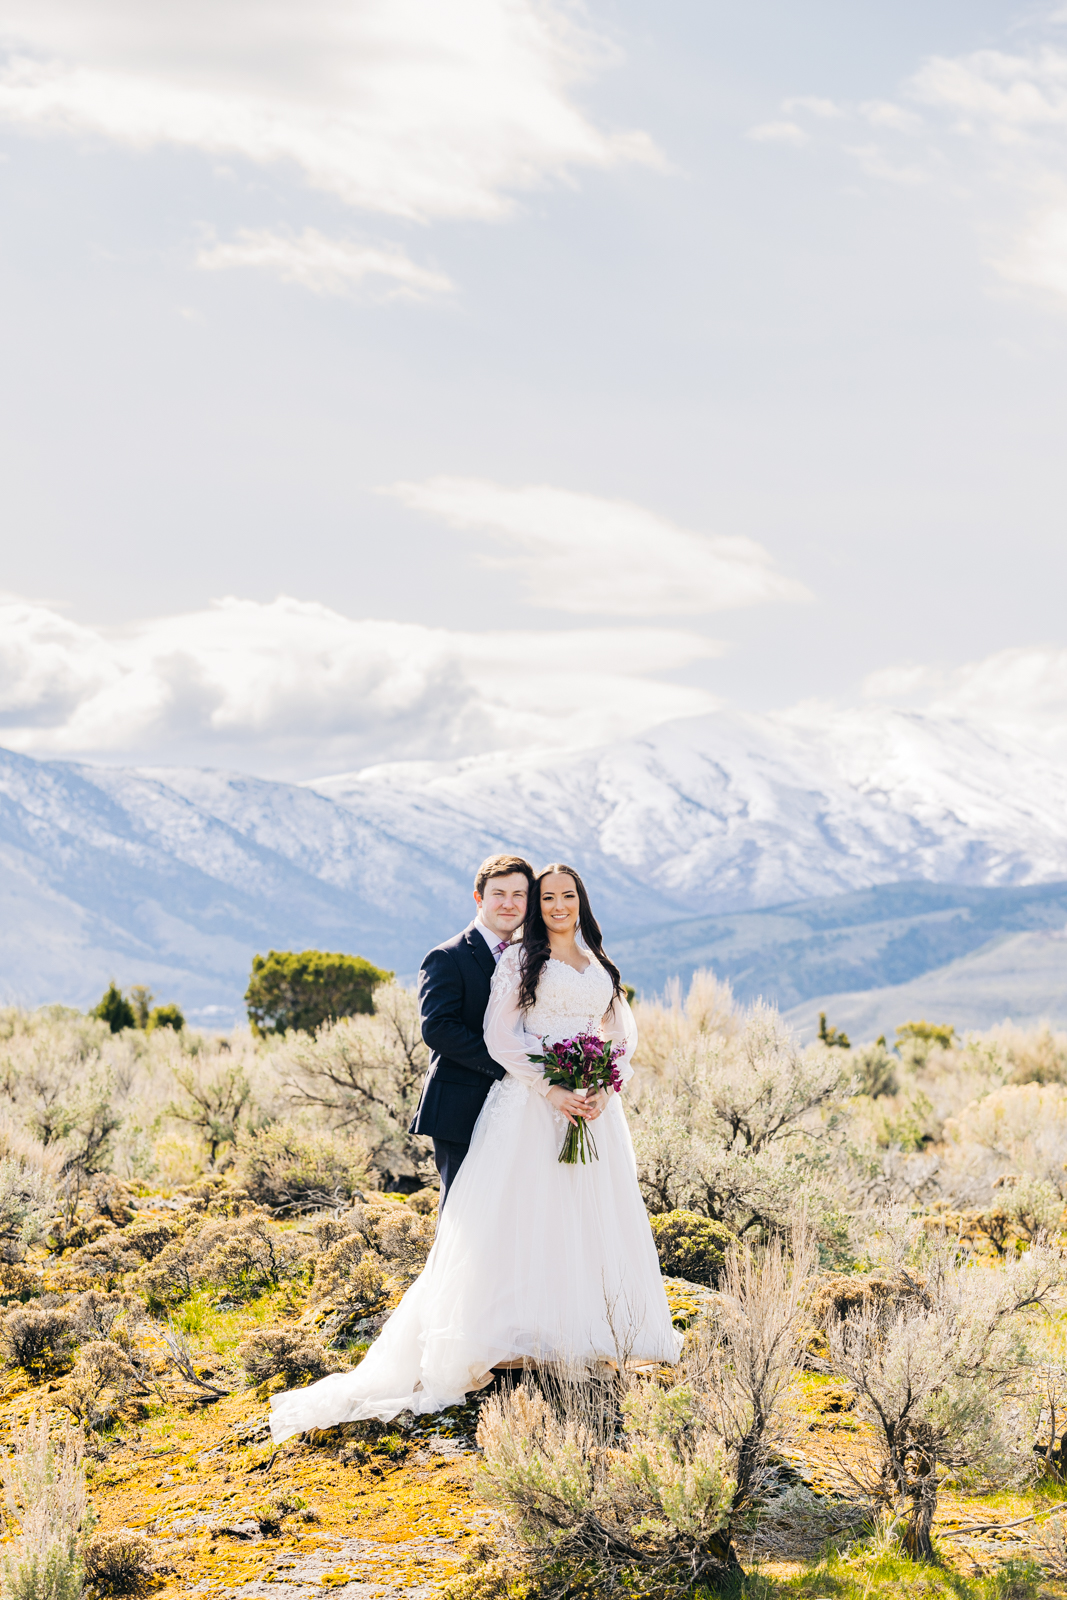 Jackson Hole wedding photographer captures bride and groom look at camera with the mountains behind them in pocatello wedding